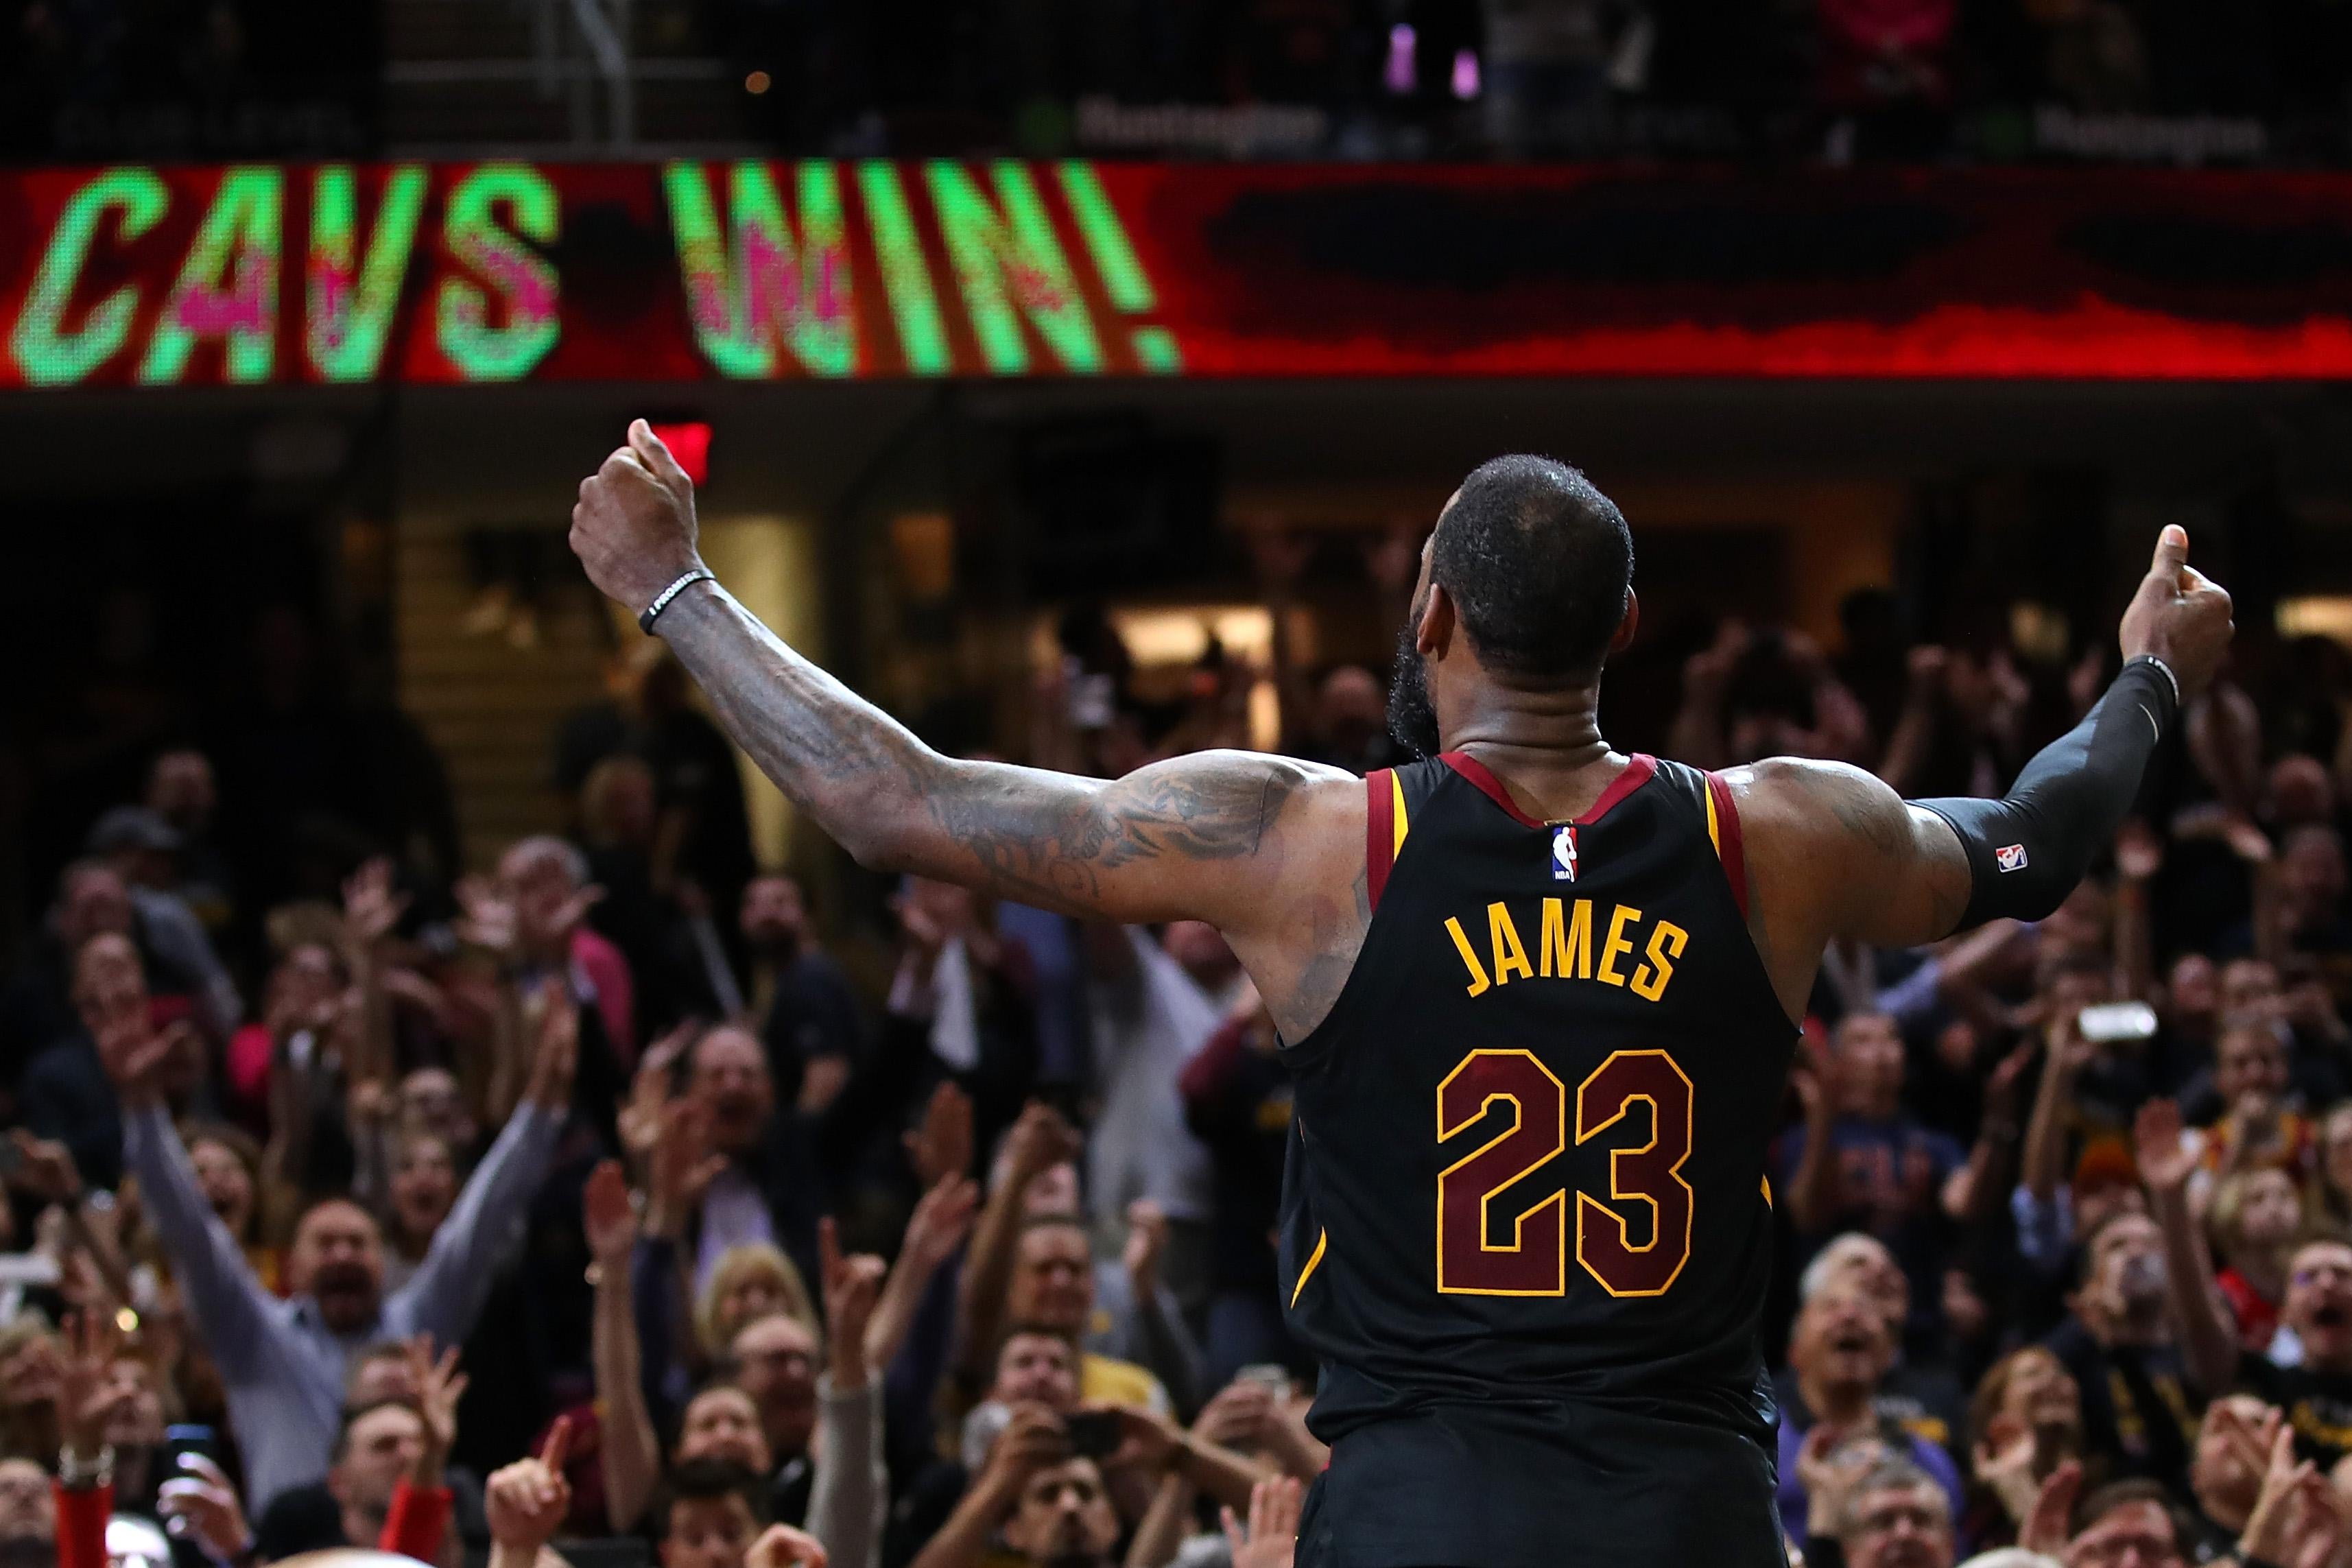 CLEVELAND, OH - MAY 05:  LeBron James #23 of the Cleveland Cavaliers celebrates after hitting the game winning shot to beat the Toronto Raptors 105-103 in Game Three of the Eastern Conference Semifinals during the 2018 NBA Playoffs at Quicken Loans Arena on May 5, 2018 in Cleveland, Ohio. NOTE TO USER: User expressly acknowledges and agrees that, by downloading and or using this photograph, User is consenting to the terms and conditions of the Getty Images License Agreement. (Photo by Gregory Shamus/Getty Images)